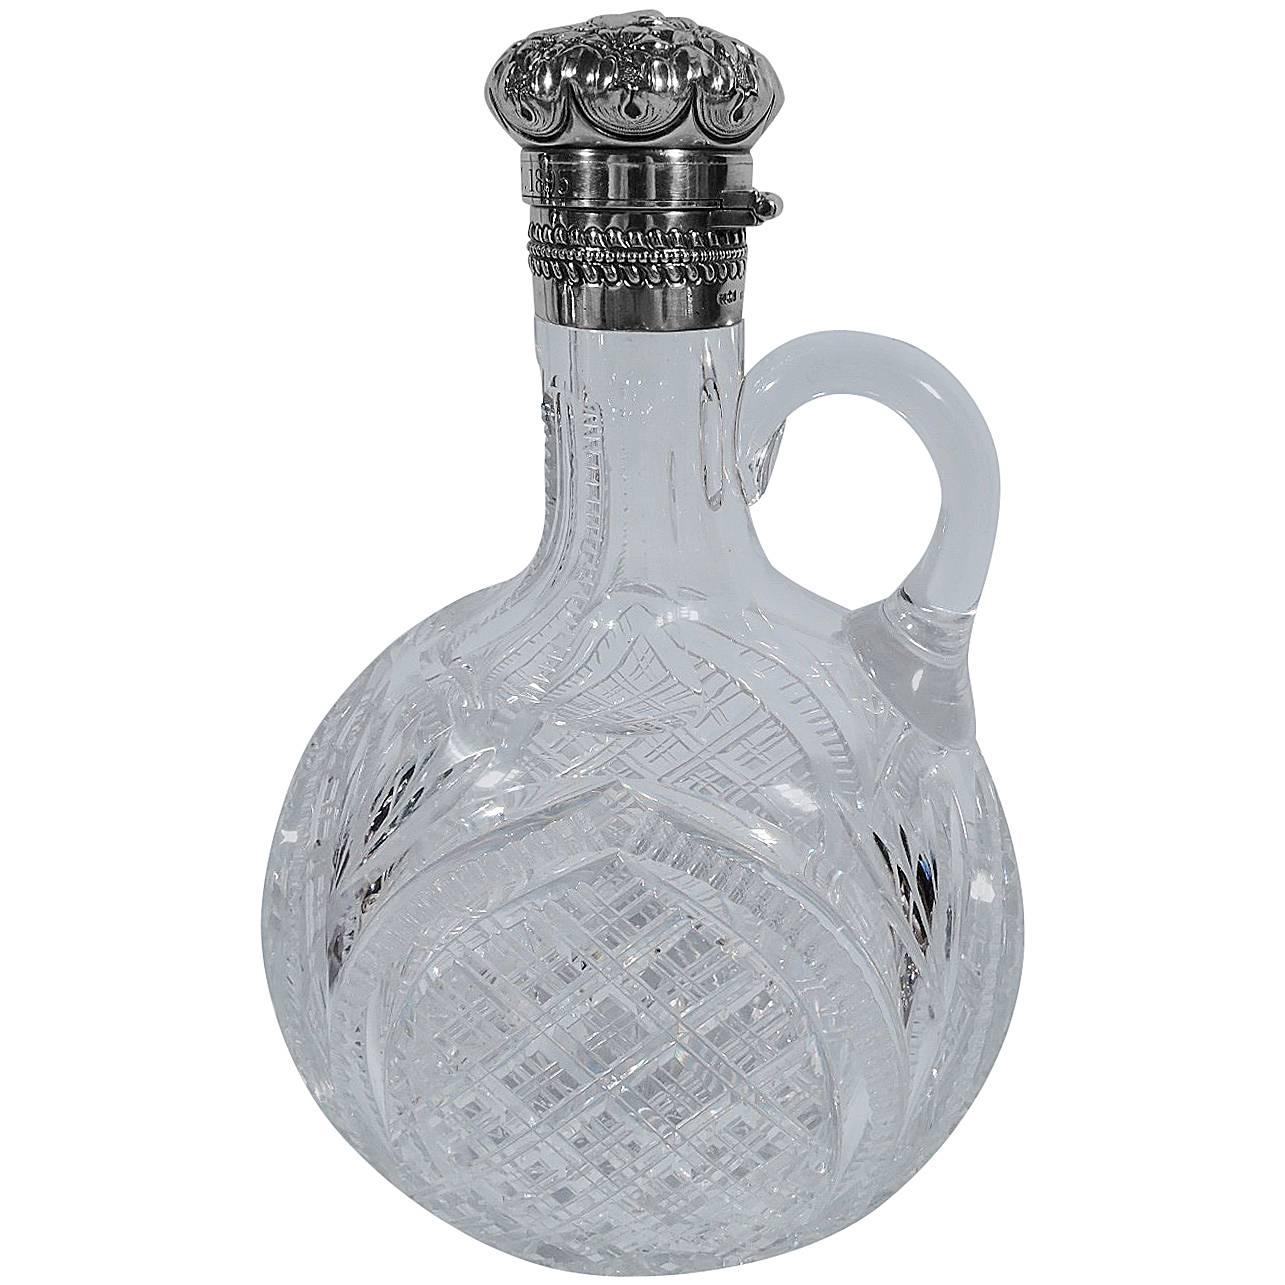 Gorham Brilliant-Cut Glass and Sterling Silver Moon Flask Decanter